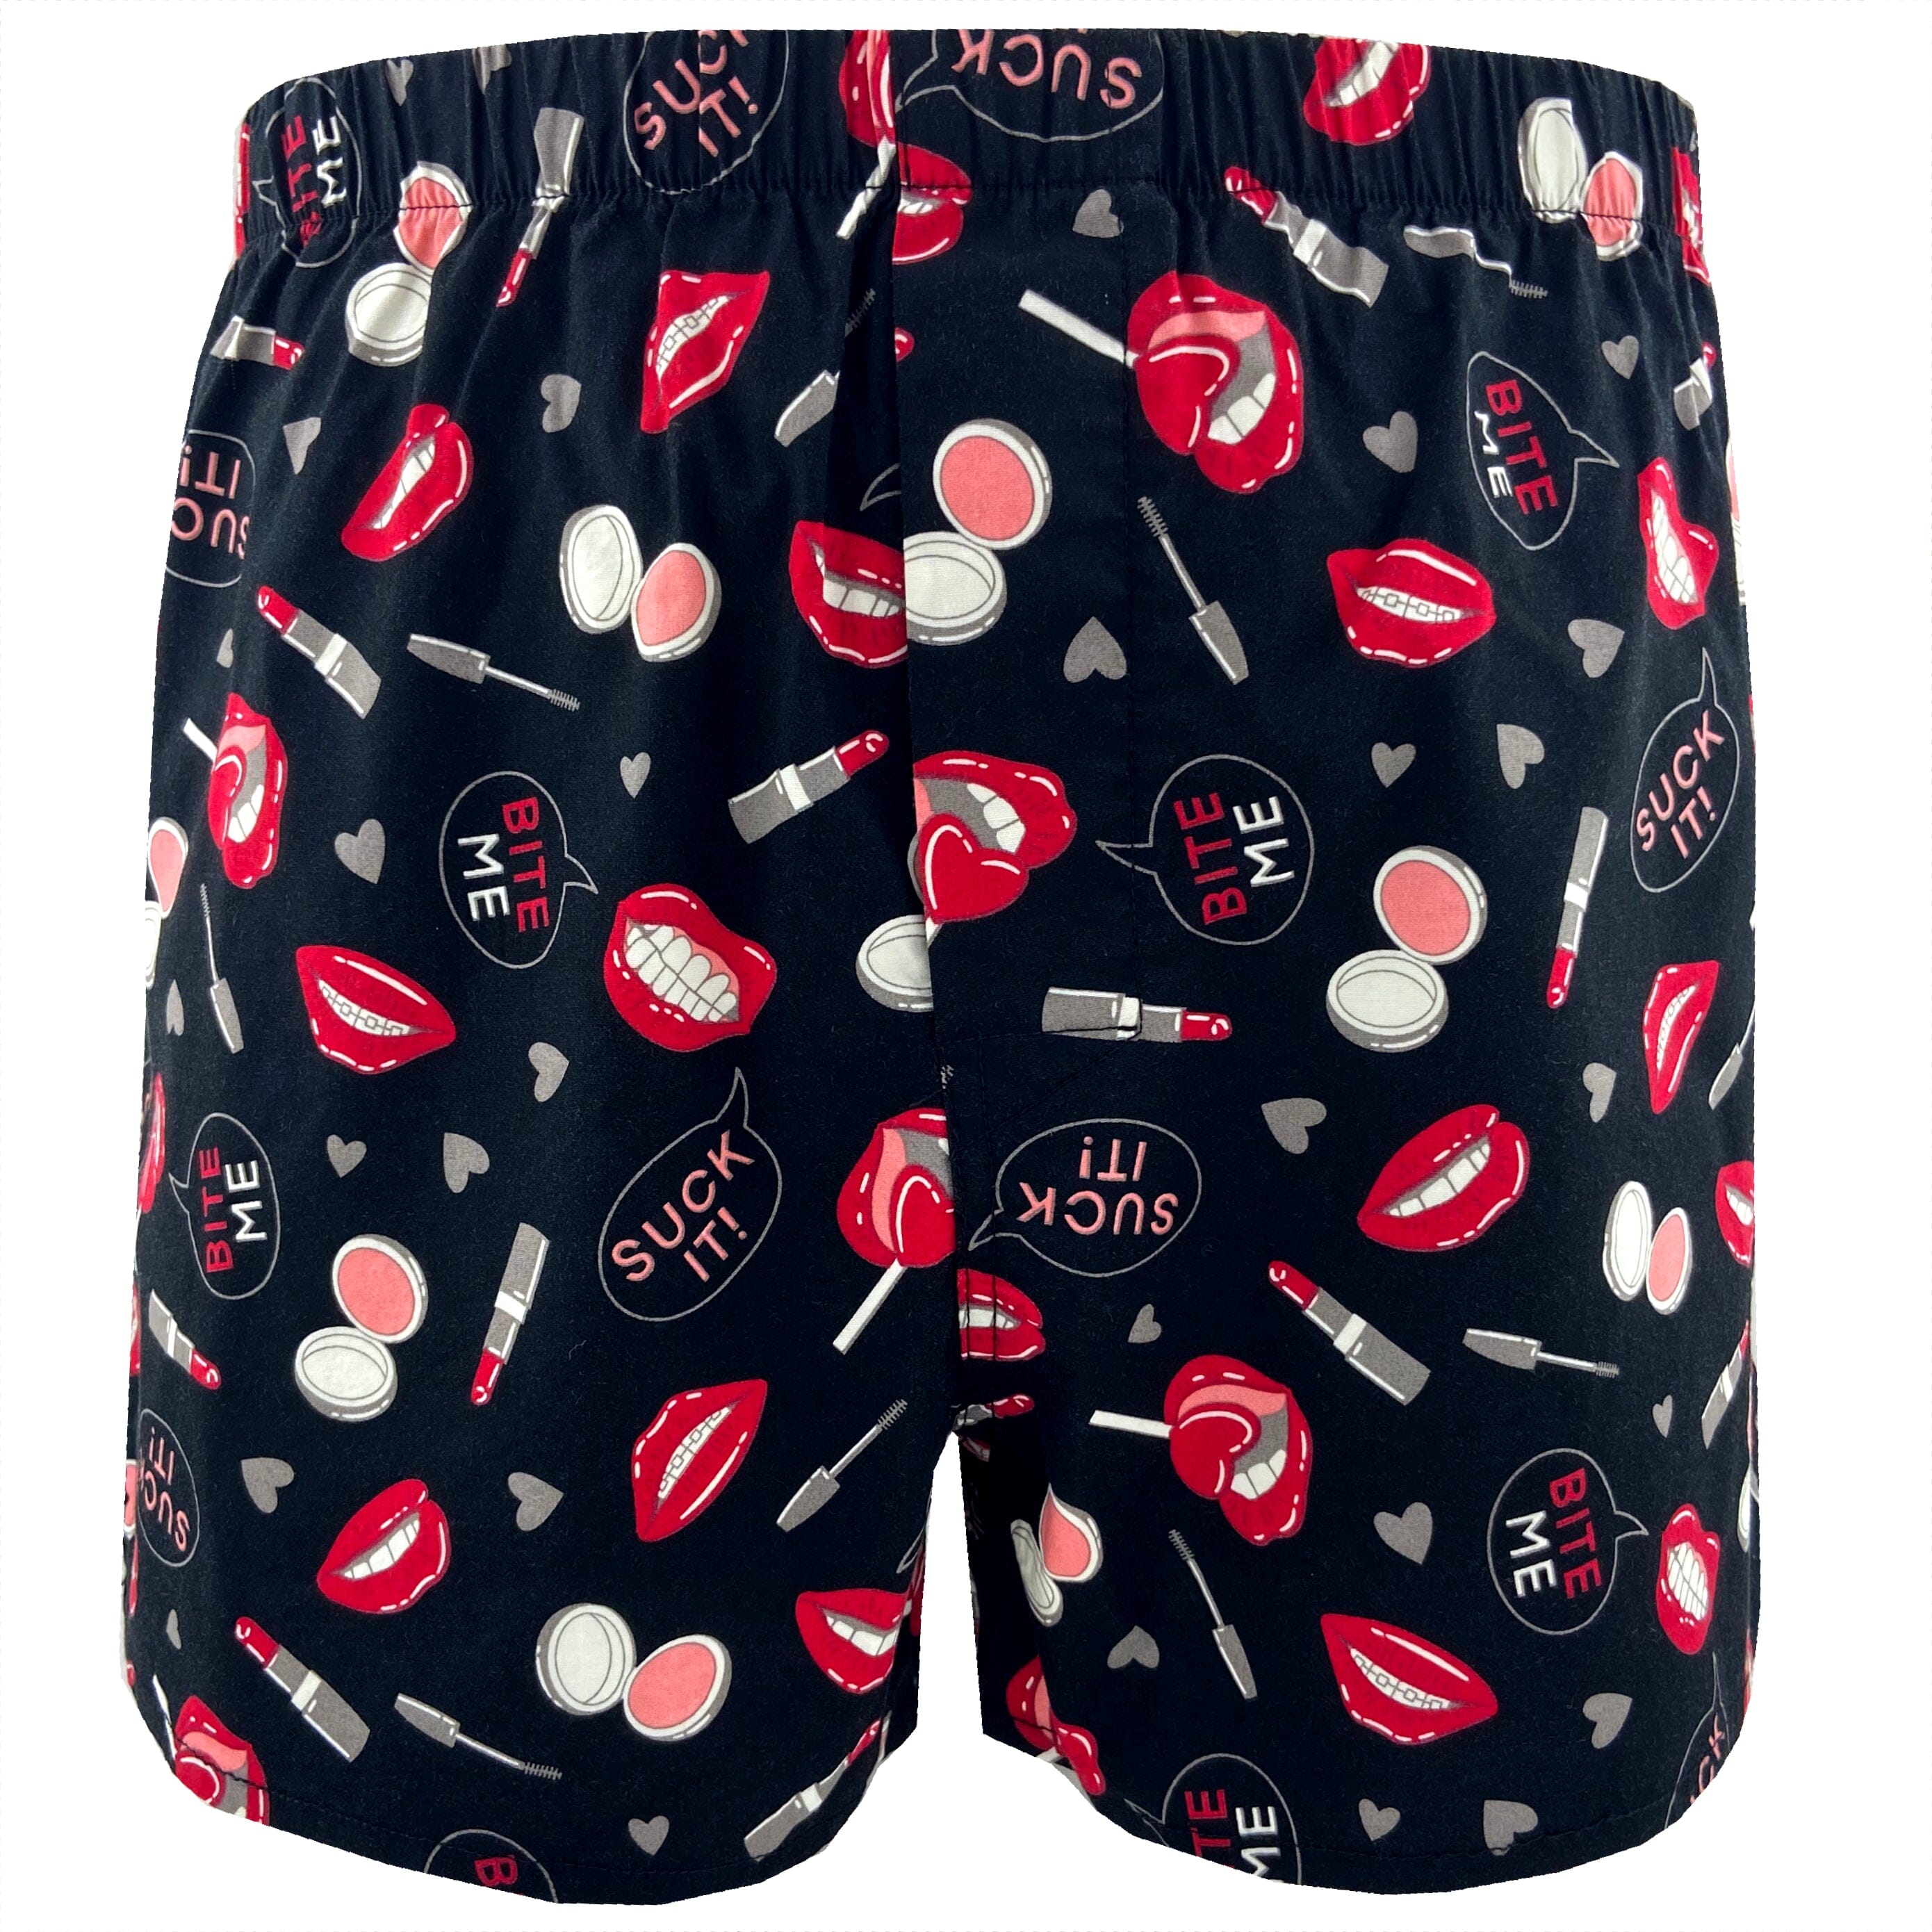 Men's Sexy & Suggestive Bright Red Lips Patterned Cotton Boxer Shorts